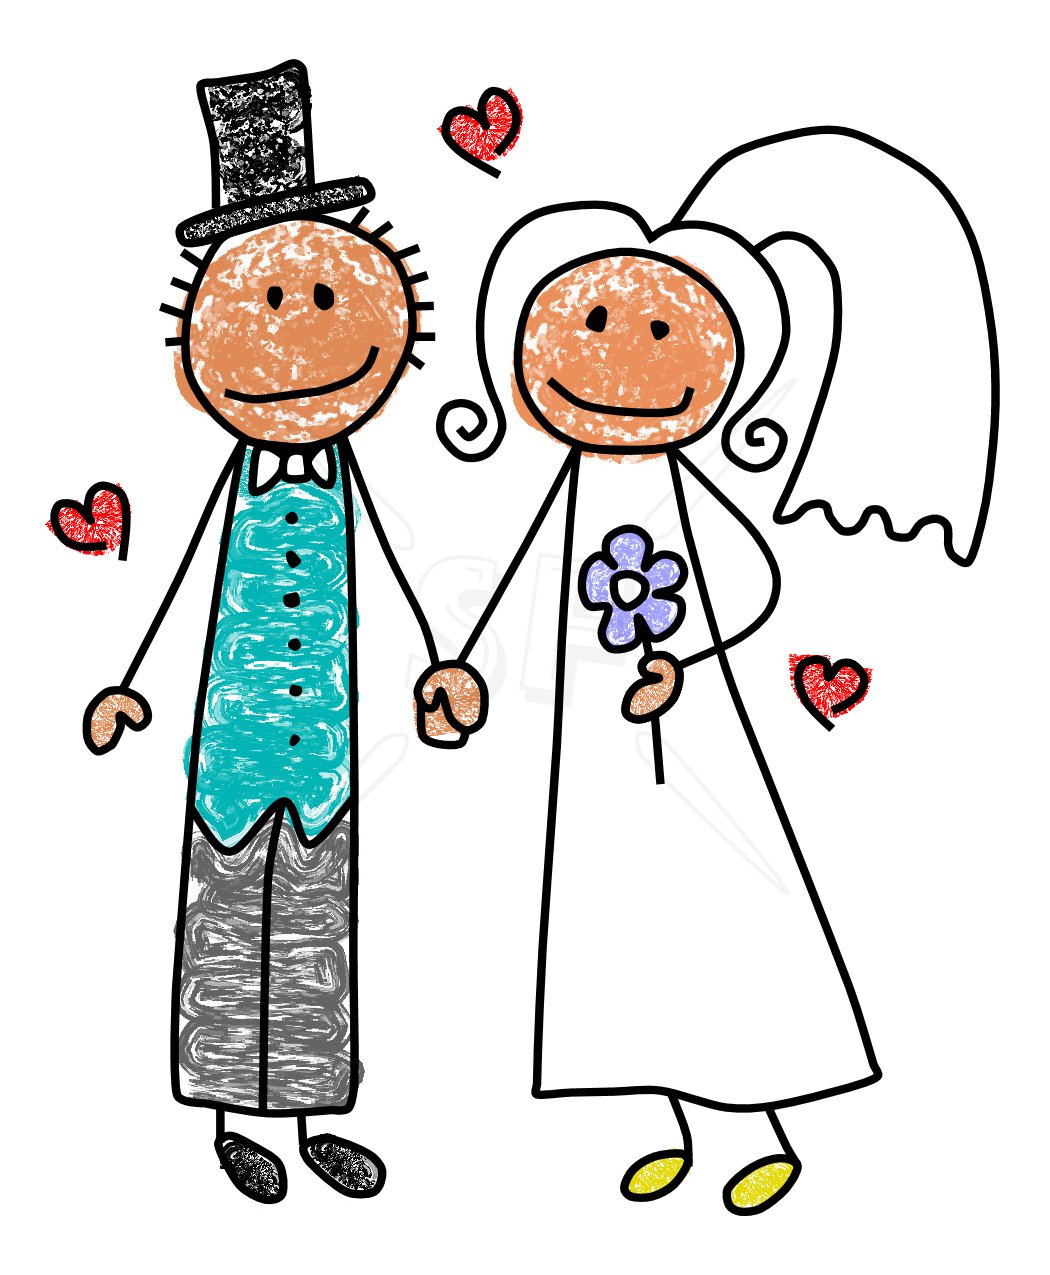 Bride and groom clipart free 